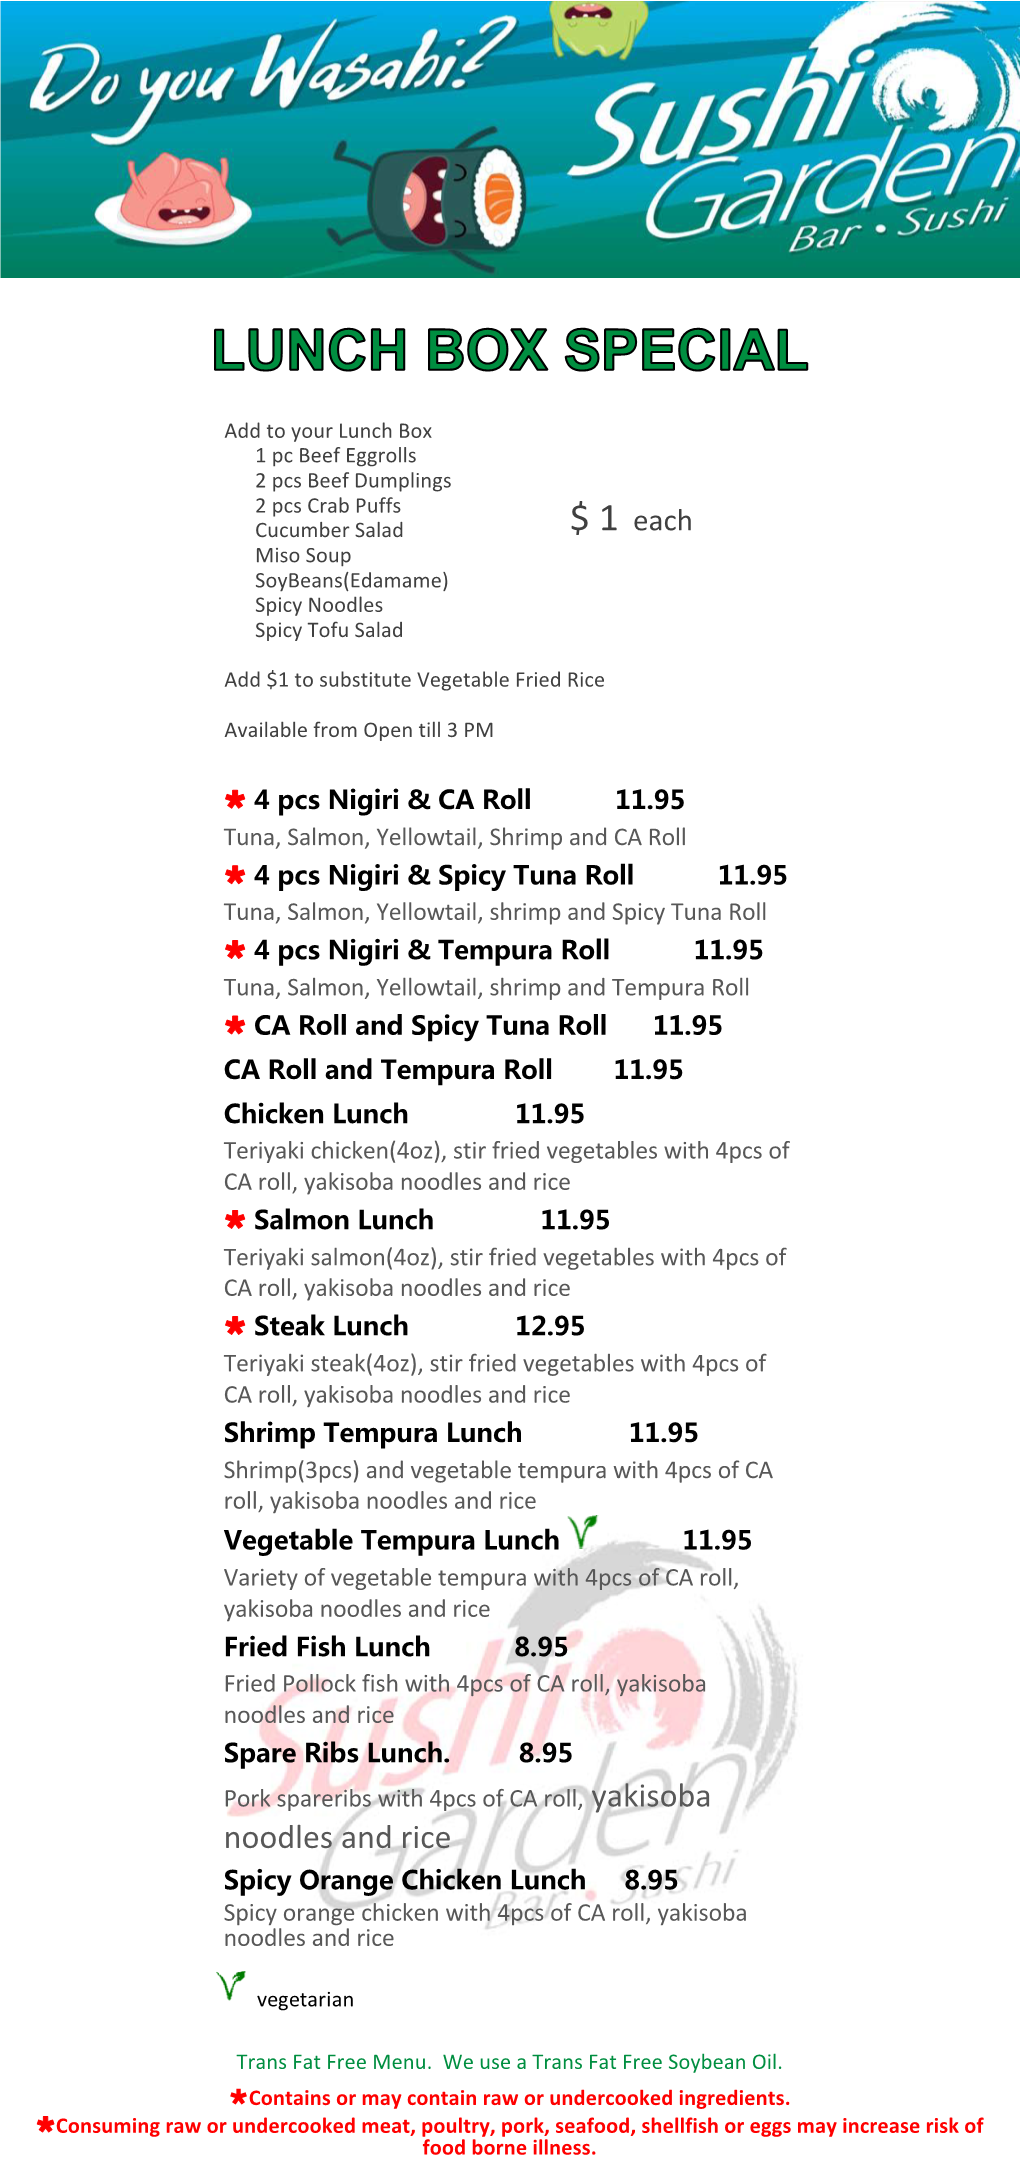 View Our Foothills Mall Menu